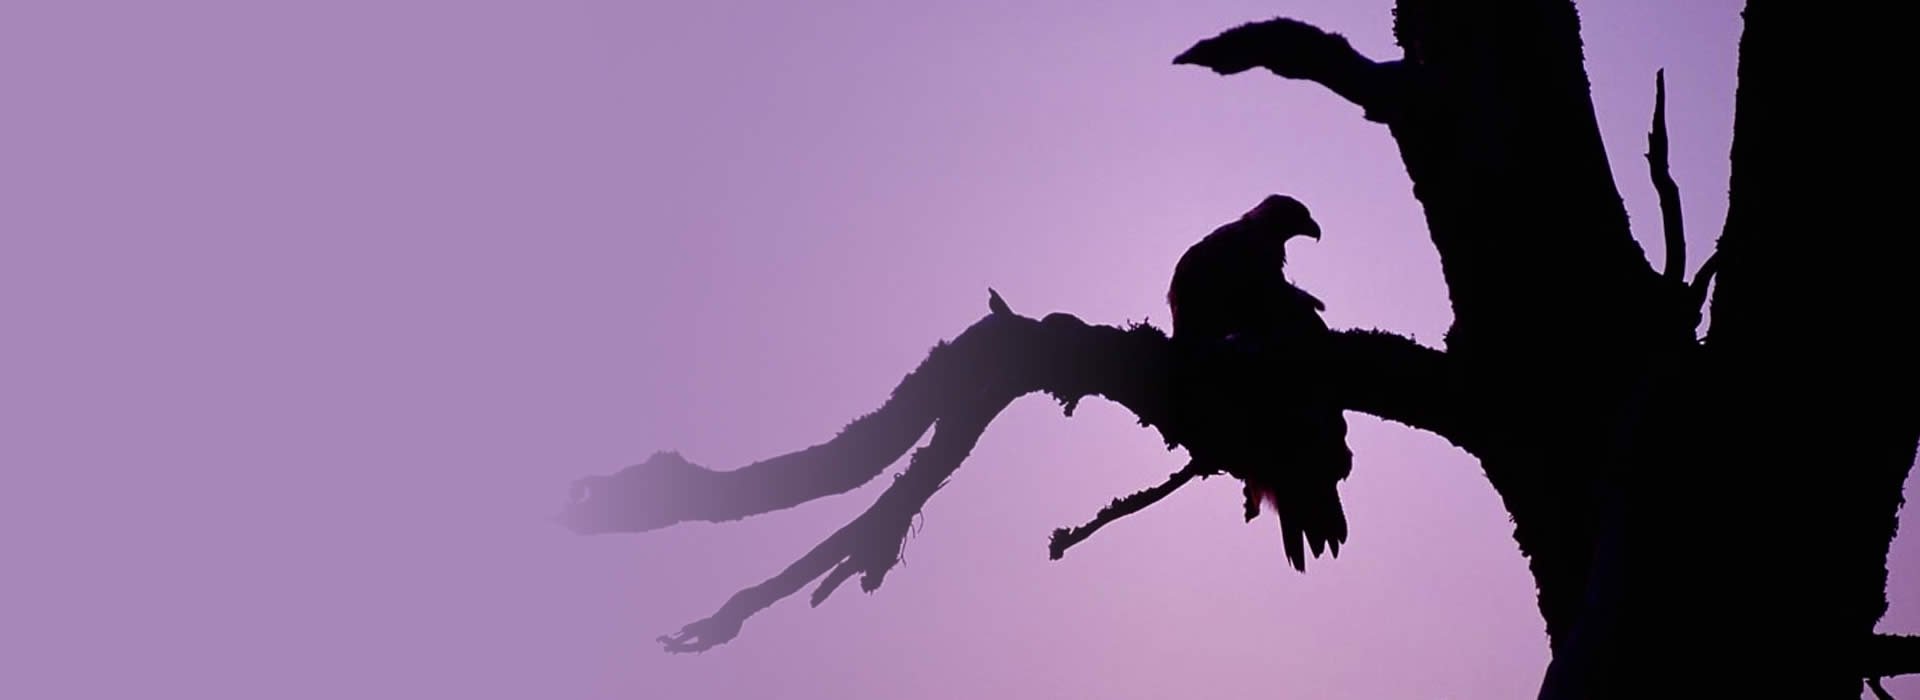 Silhouette Eagle - Laurie Campbell